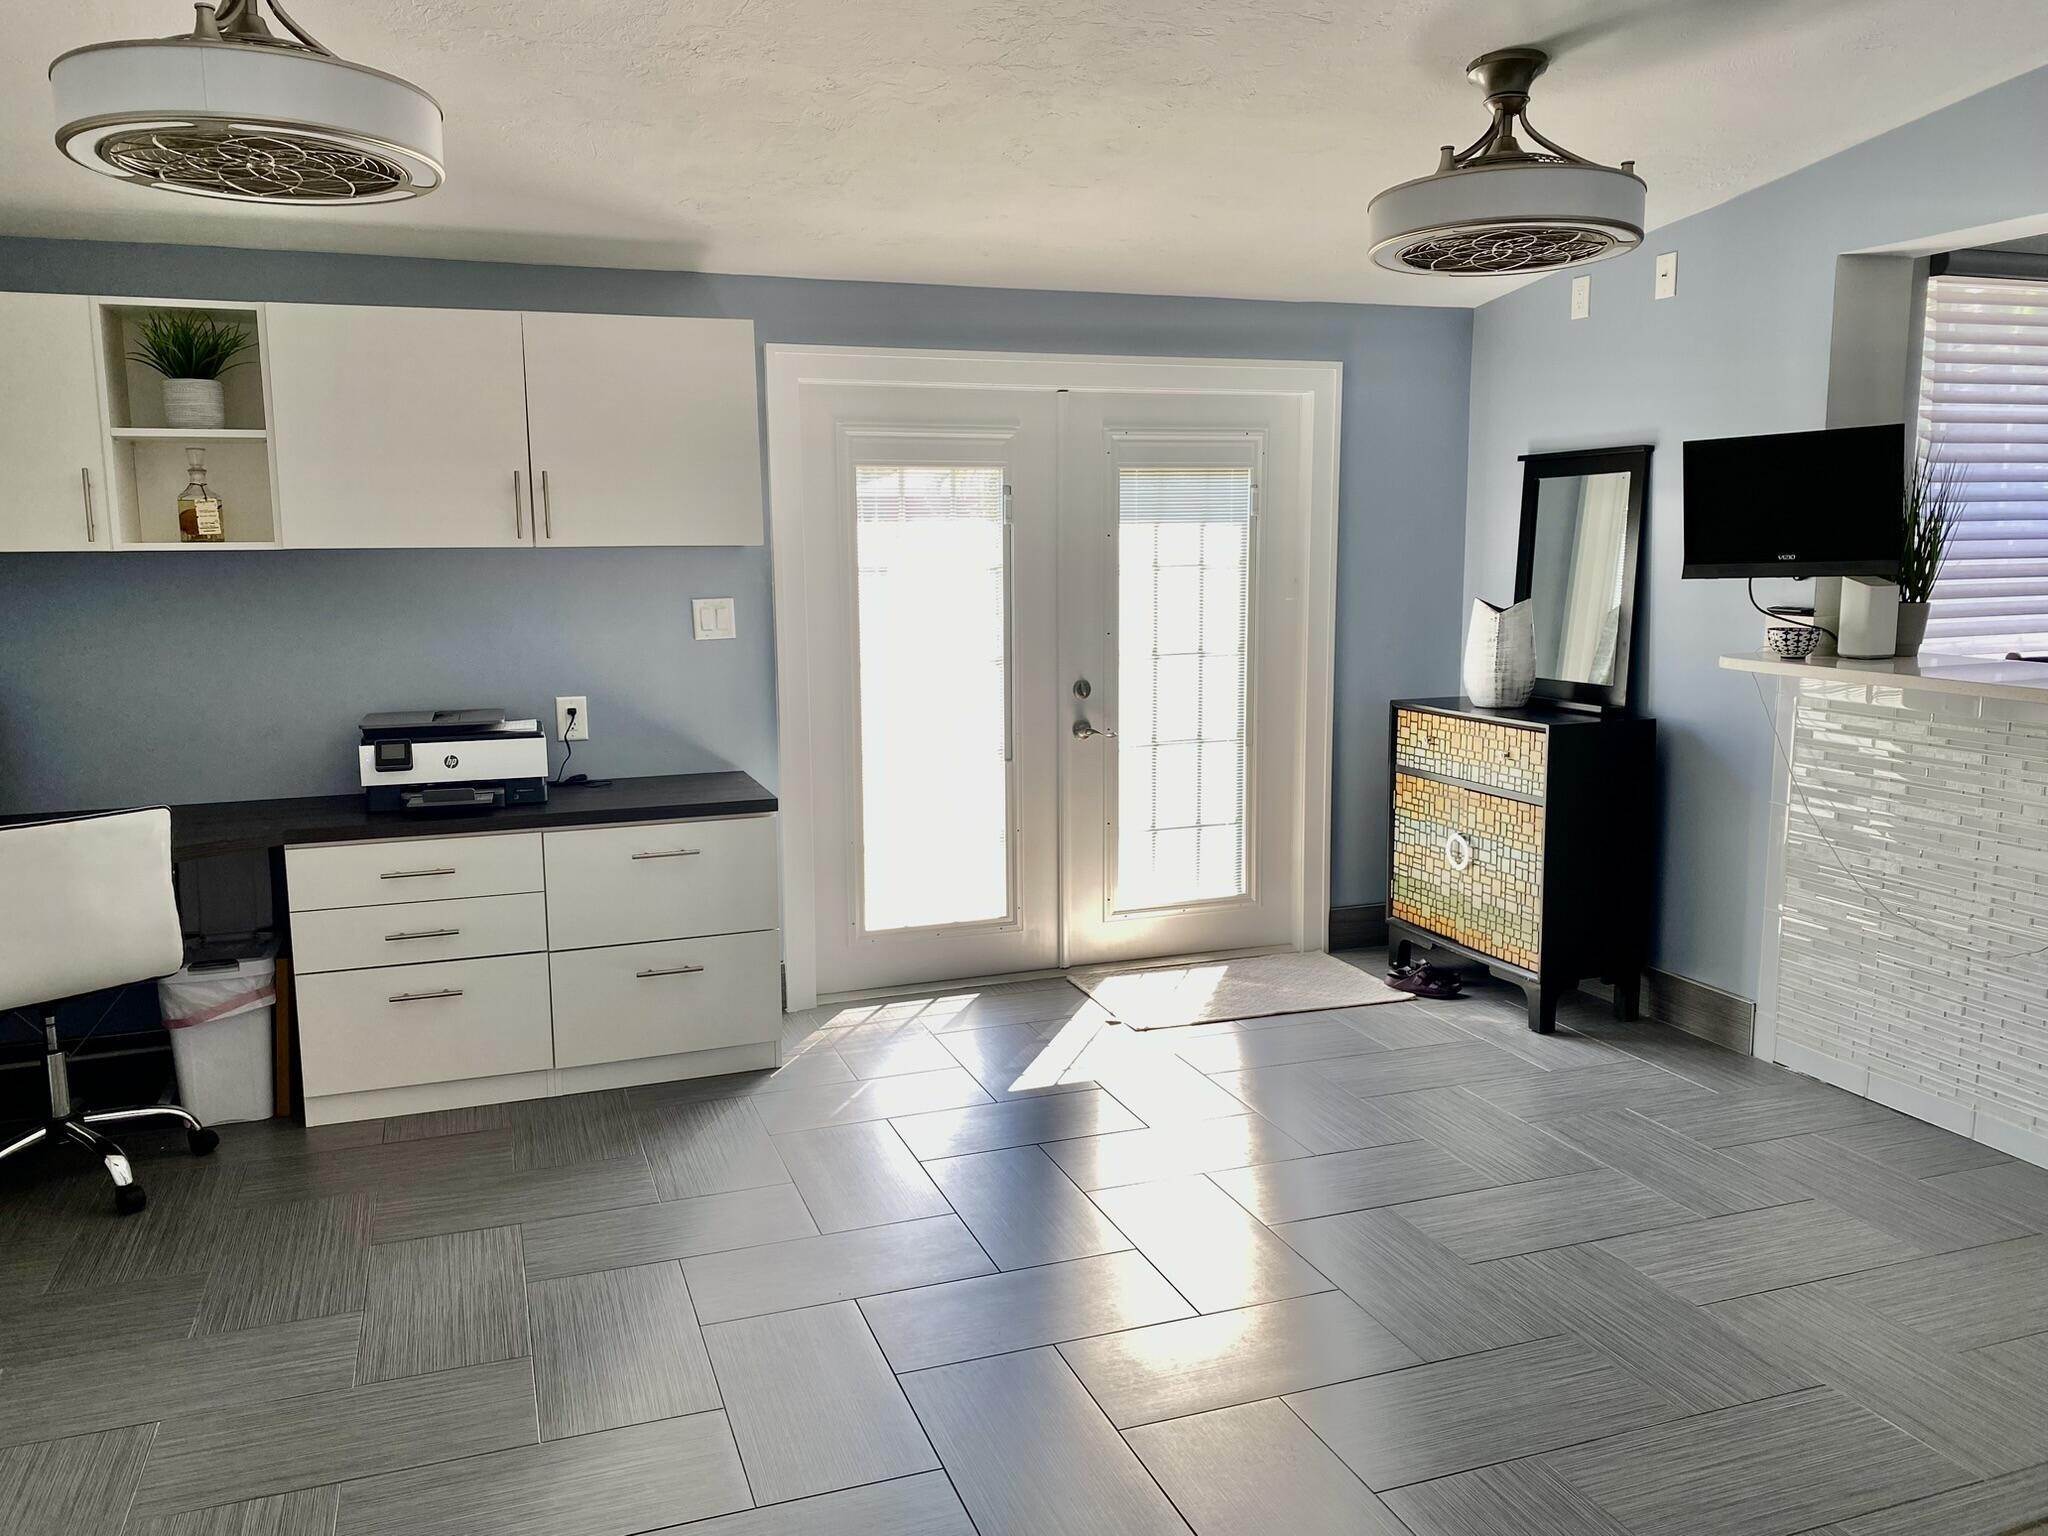 19. Single Family for Sale at Marco Island, FL 34145